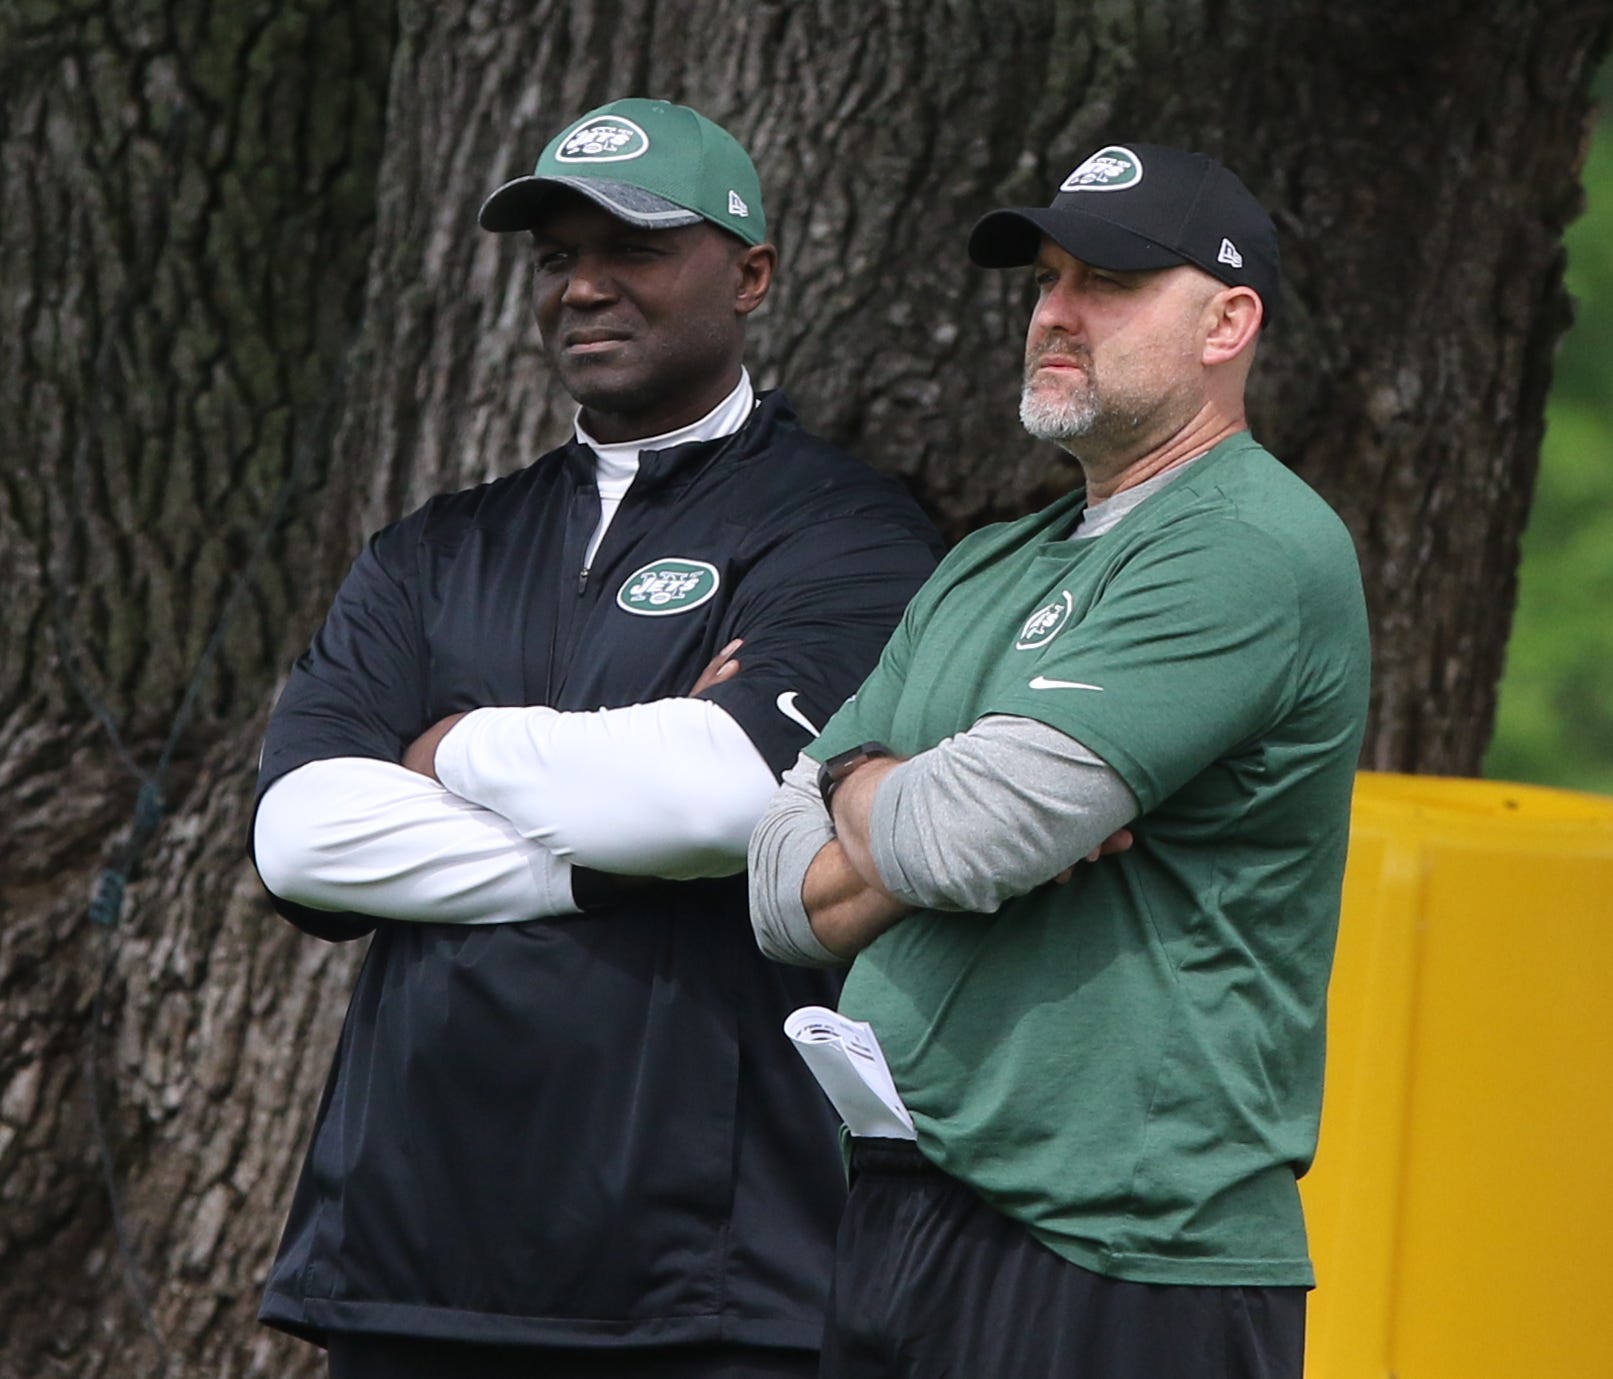 The Jets head coach Todd Bowles and offensive coordinator John Morton watch practice.